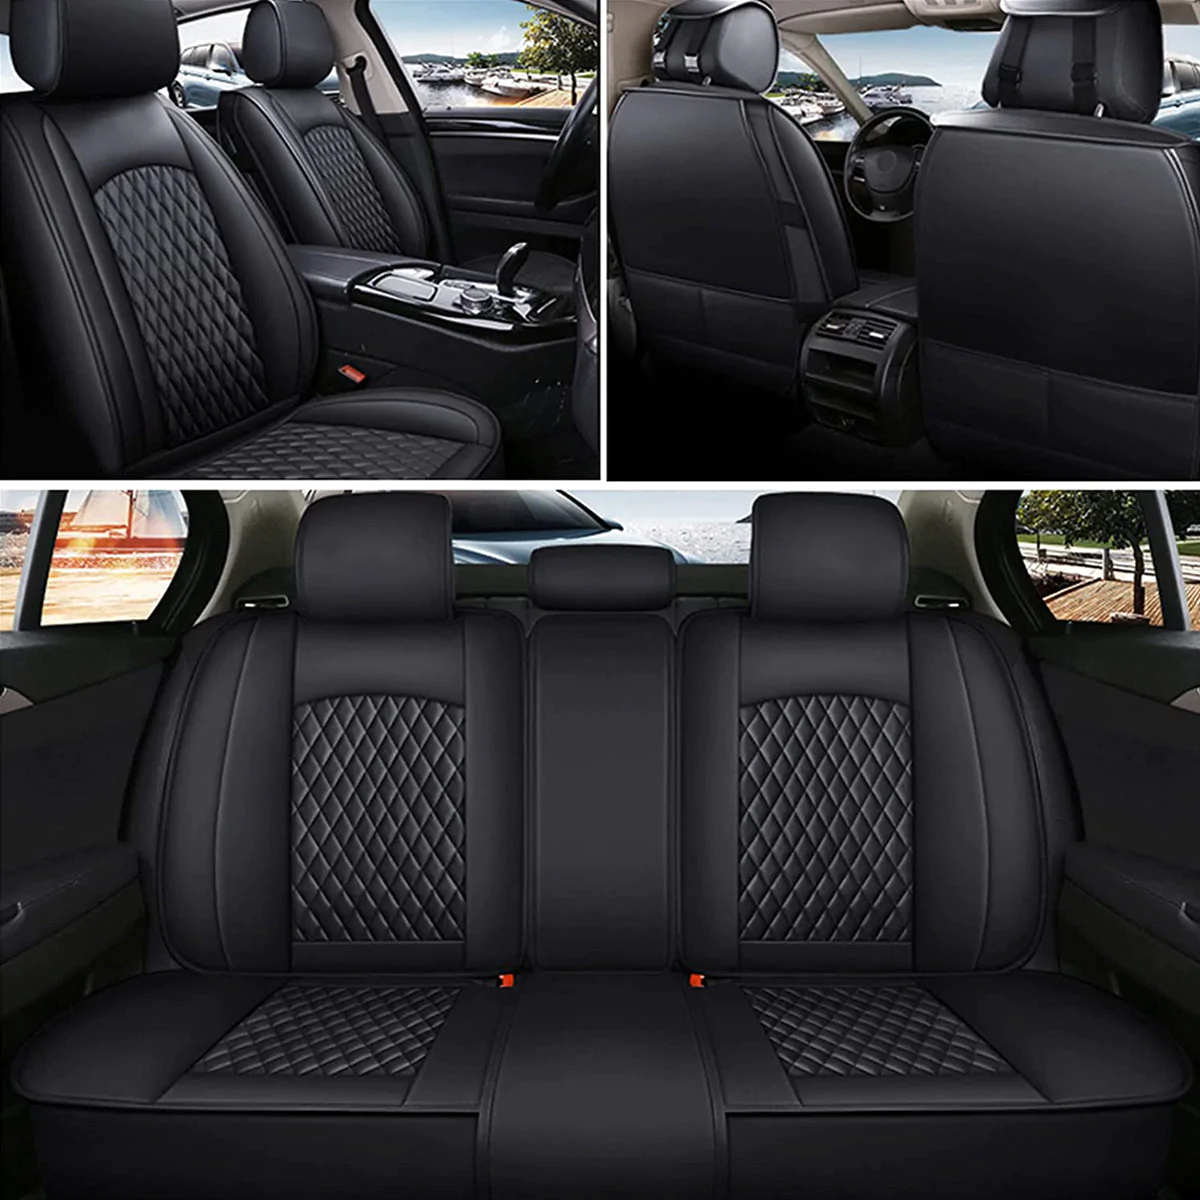 Custom Text For Seat Covers 5 Seats Full Set, Custom Fit For Your Cars, Leatherette Automotive Seat Cushion Protector Universal Fit, Vehicle Auto Interior Decor MC13988